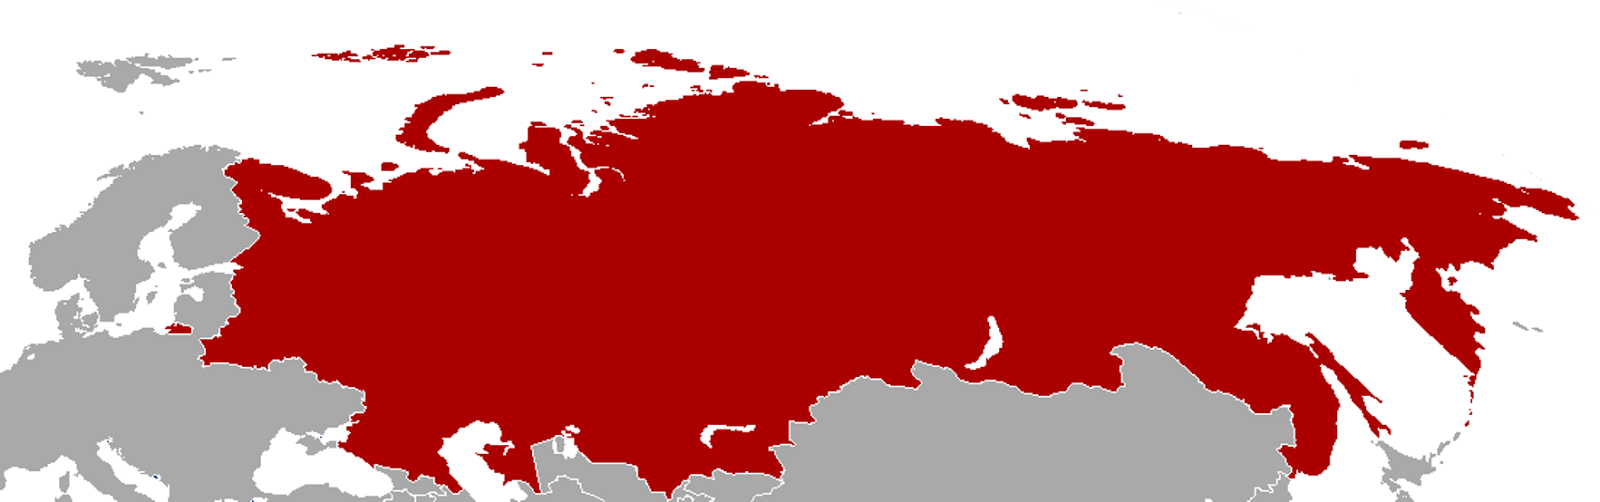 Is Russia Too Big?